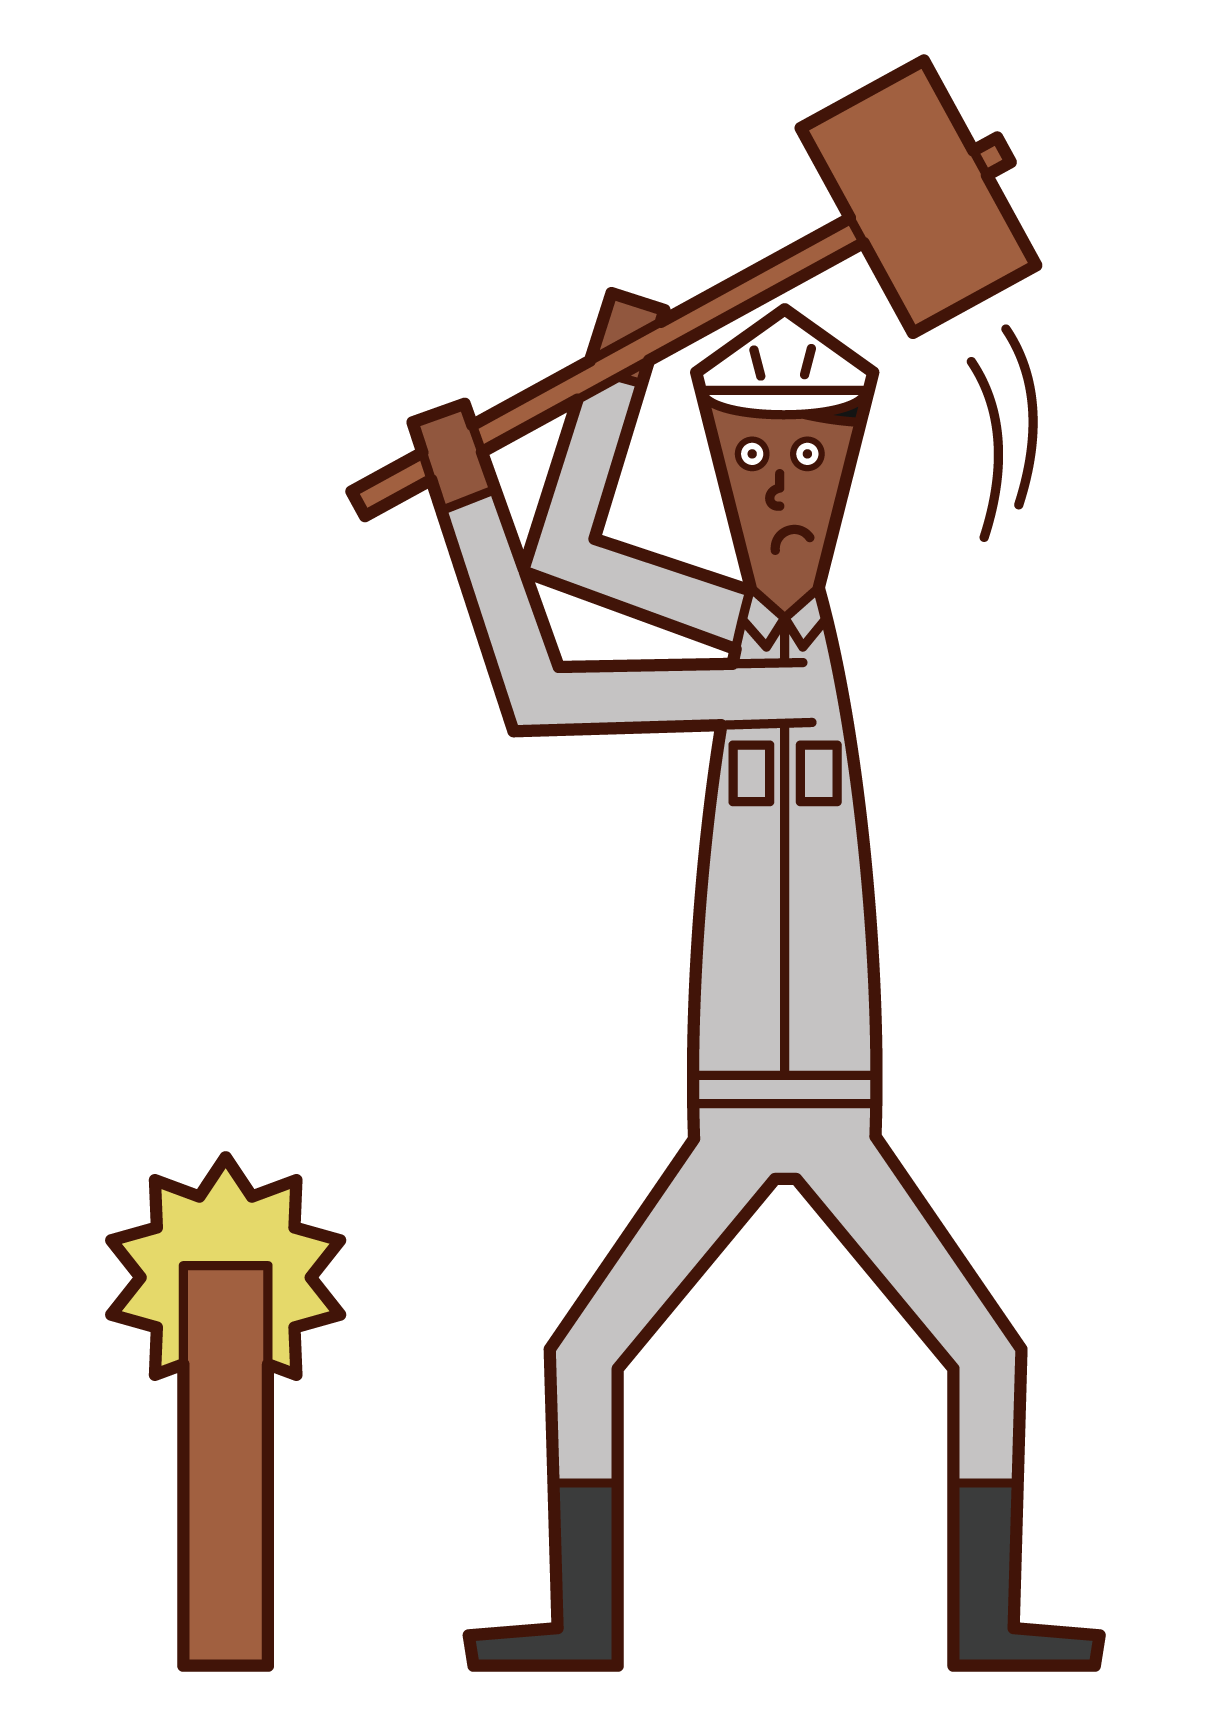 Illustration of a man hitting a stake